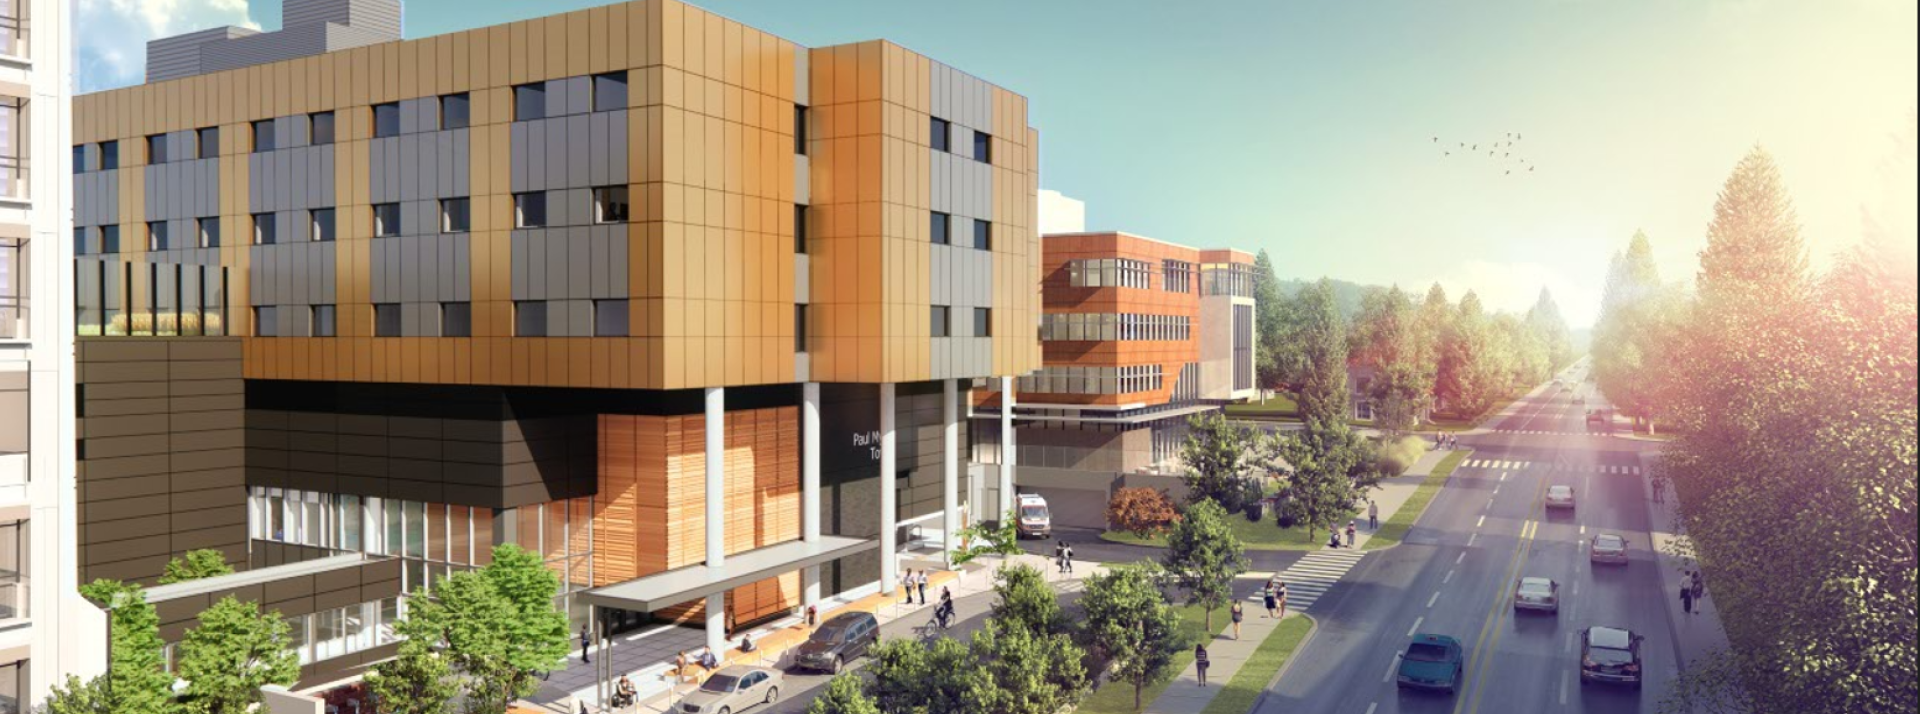 Rendering of the new Paul Myers Tower at Lions Gate Hospital.